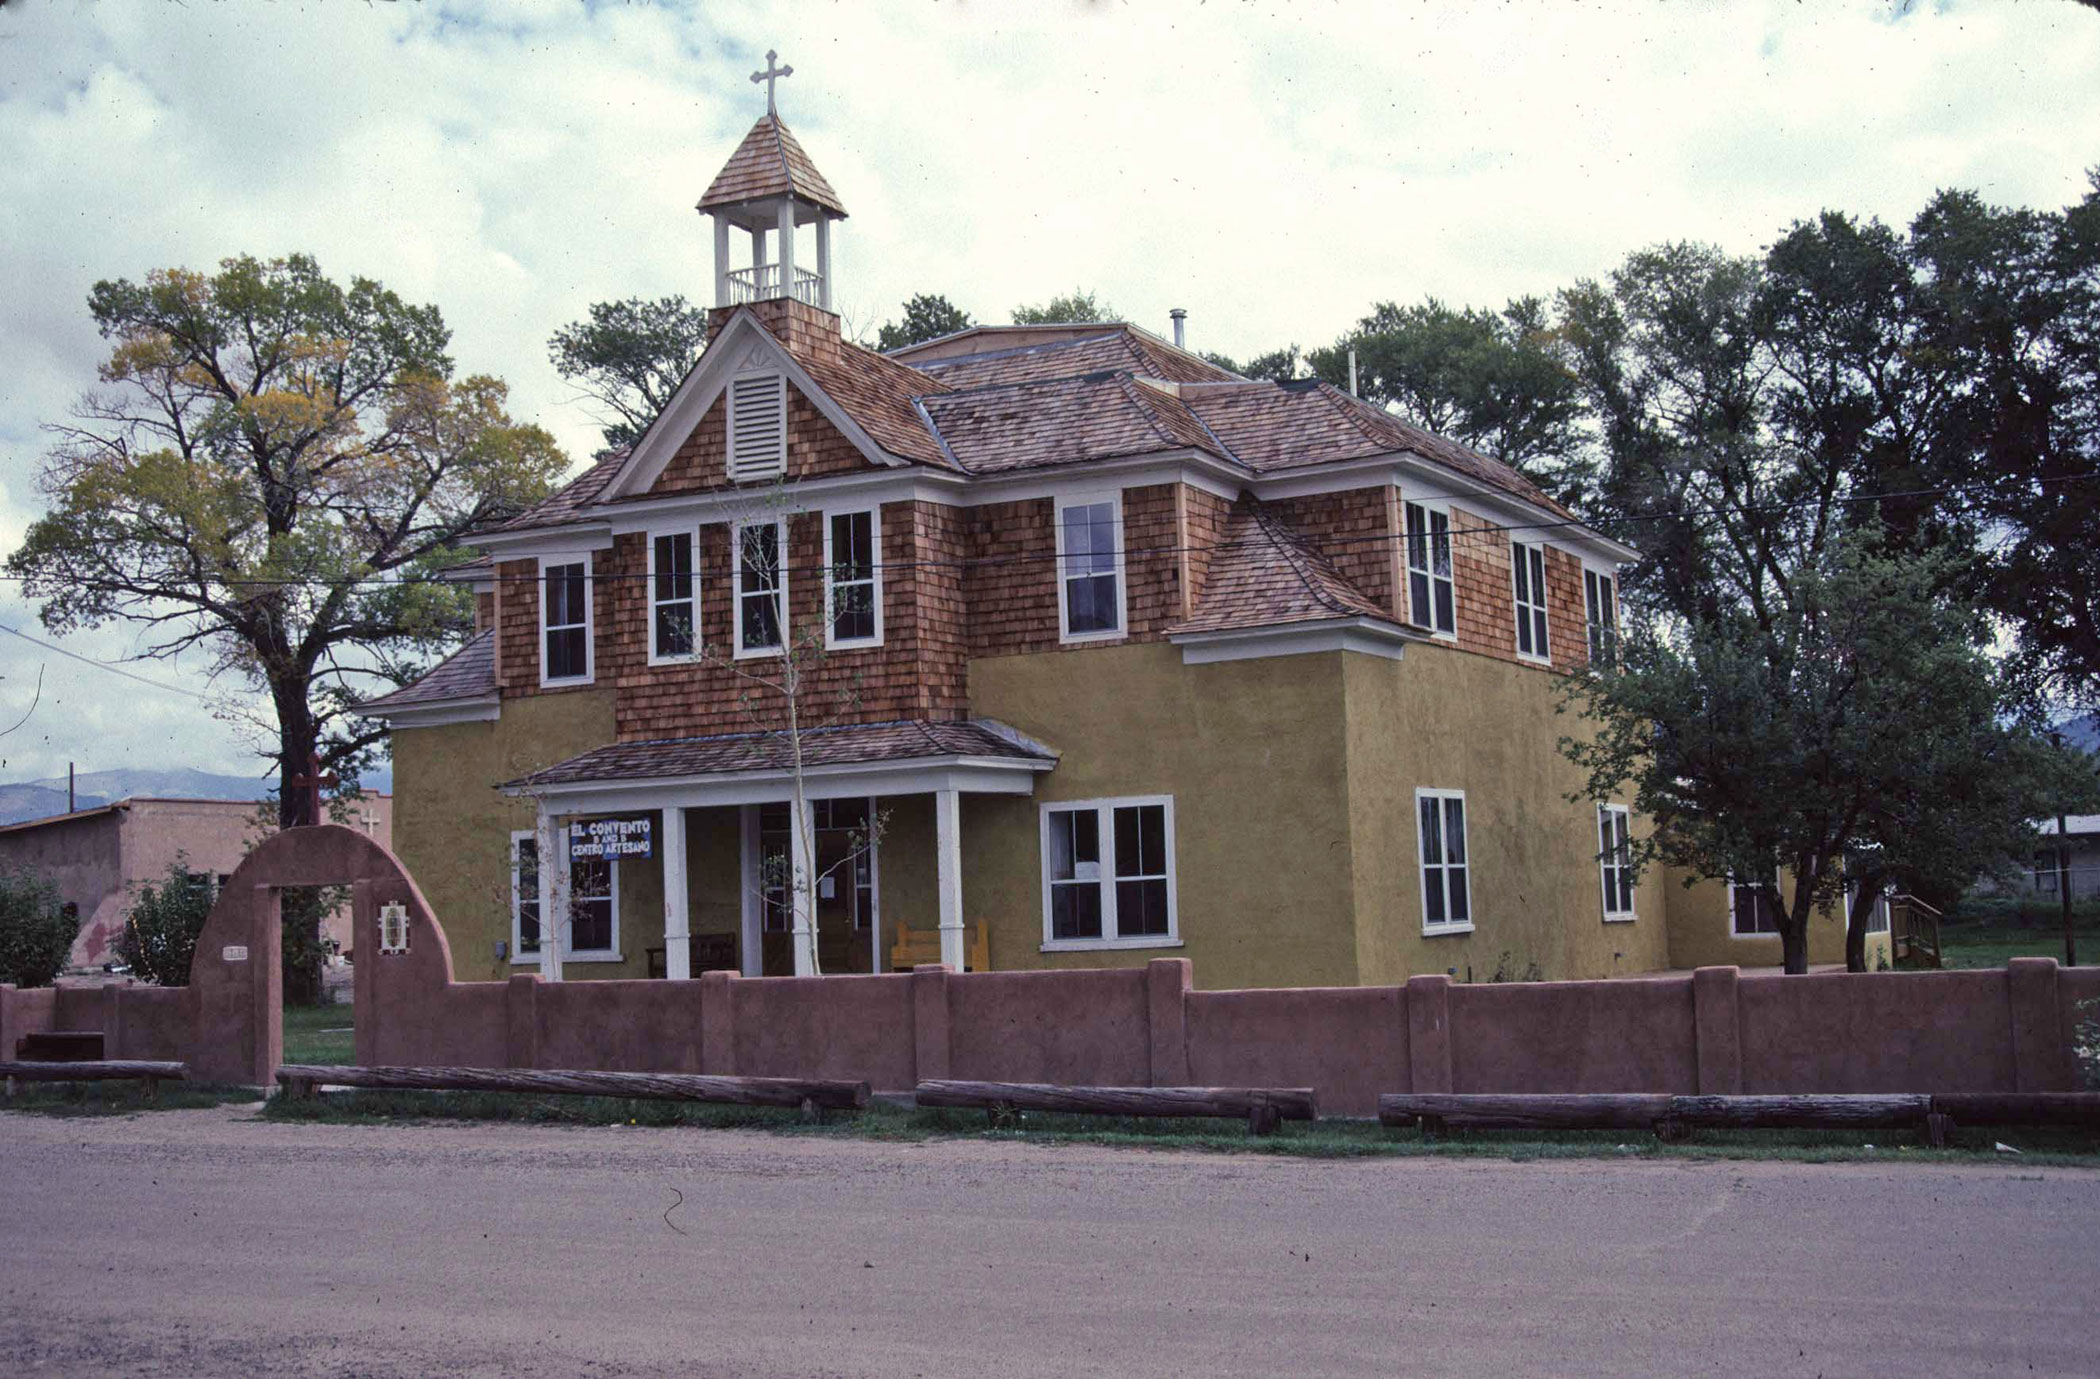 Convent of the Most Precious Blood, 1996.